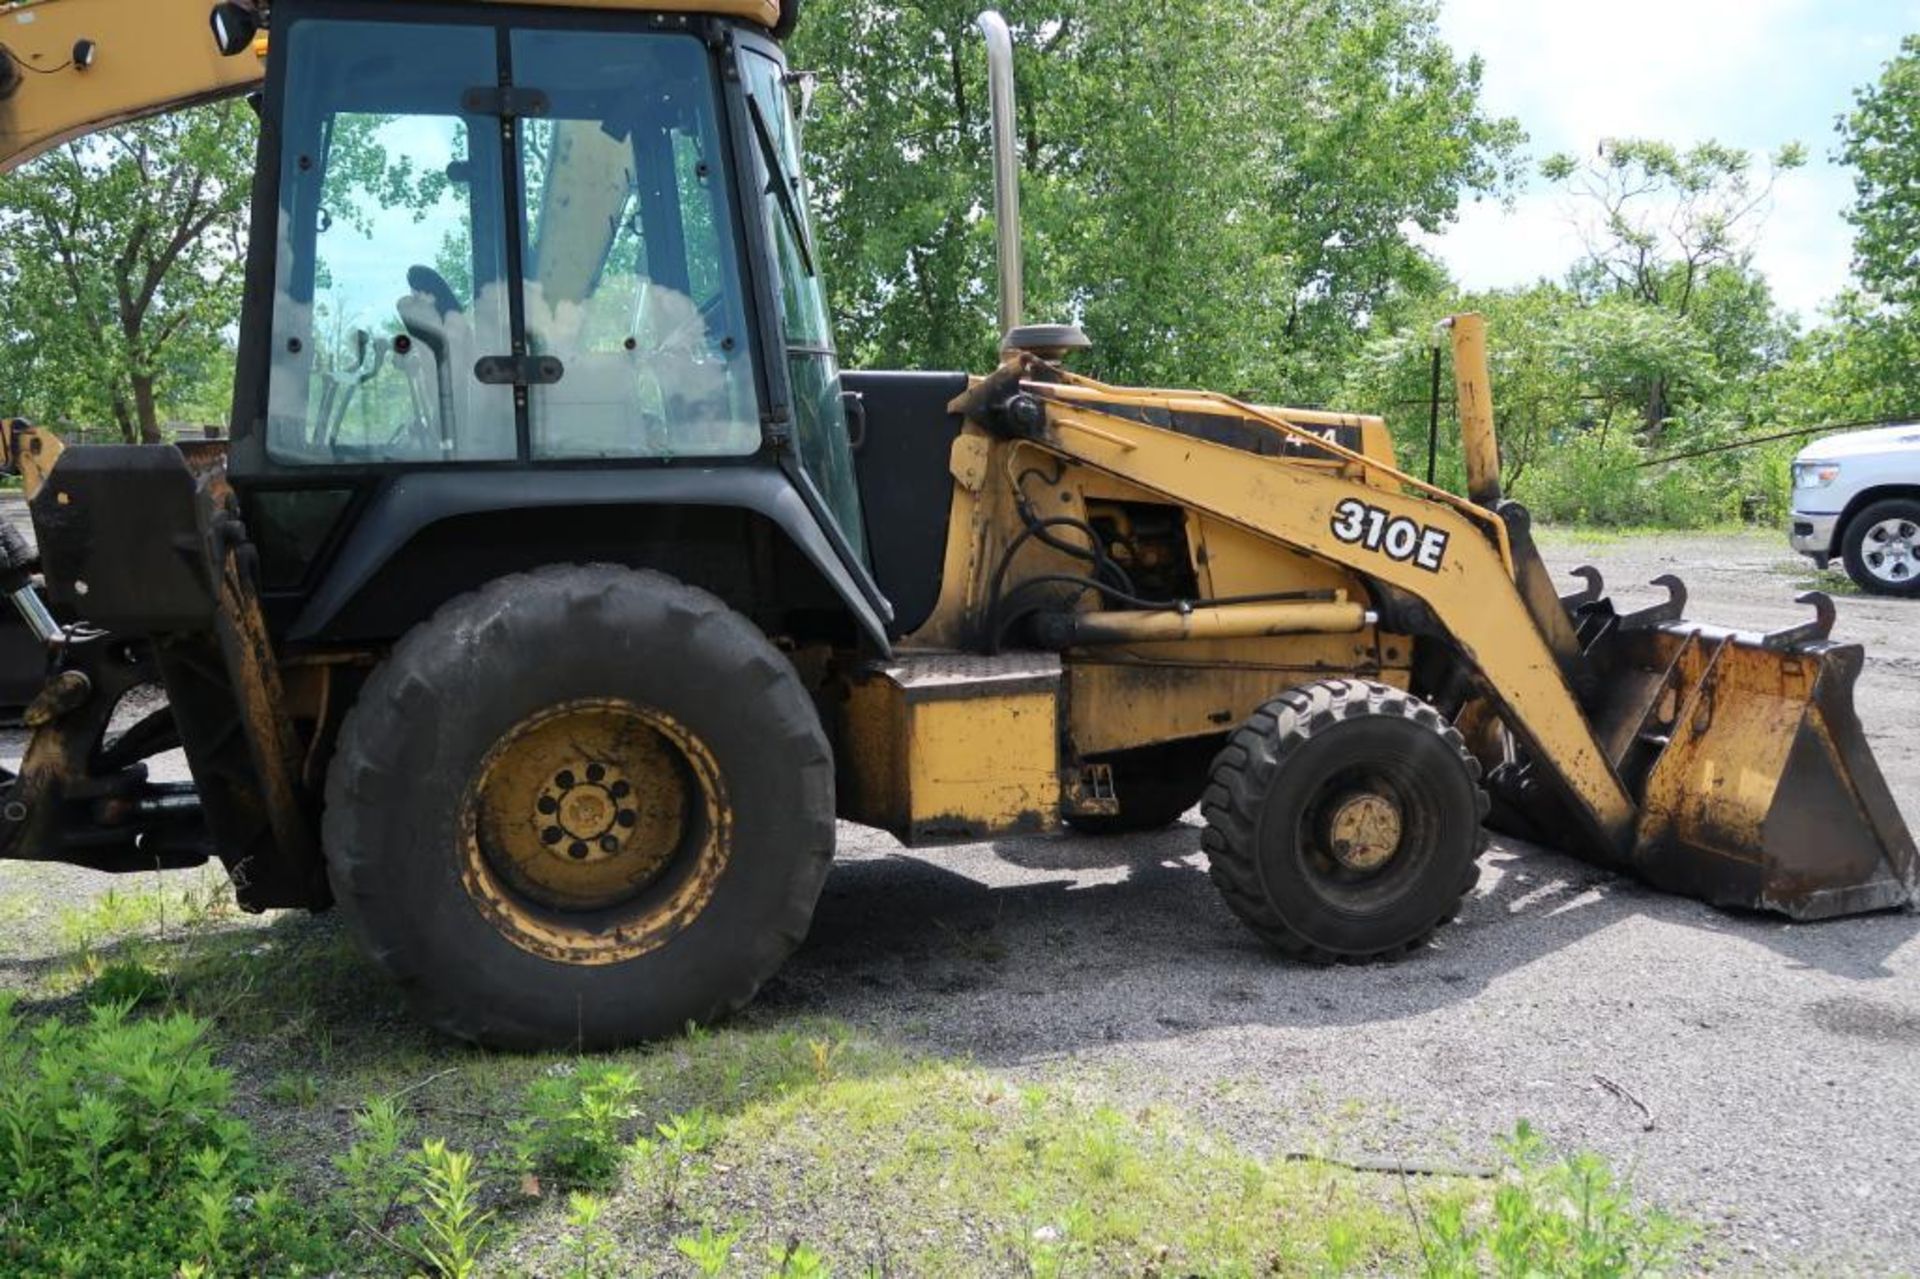 John Deere 4x4 Loader Backhoe Model 310E, S/N T0310EX890469, Air Conditioned Cab, Outriggers, 85 in. - Image 3 of 4